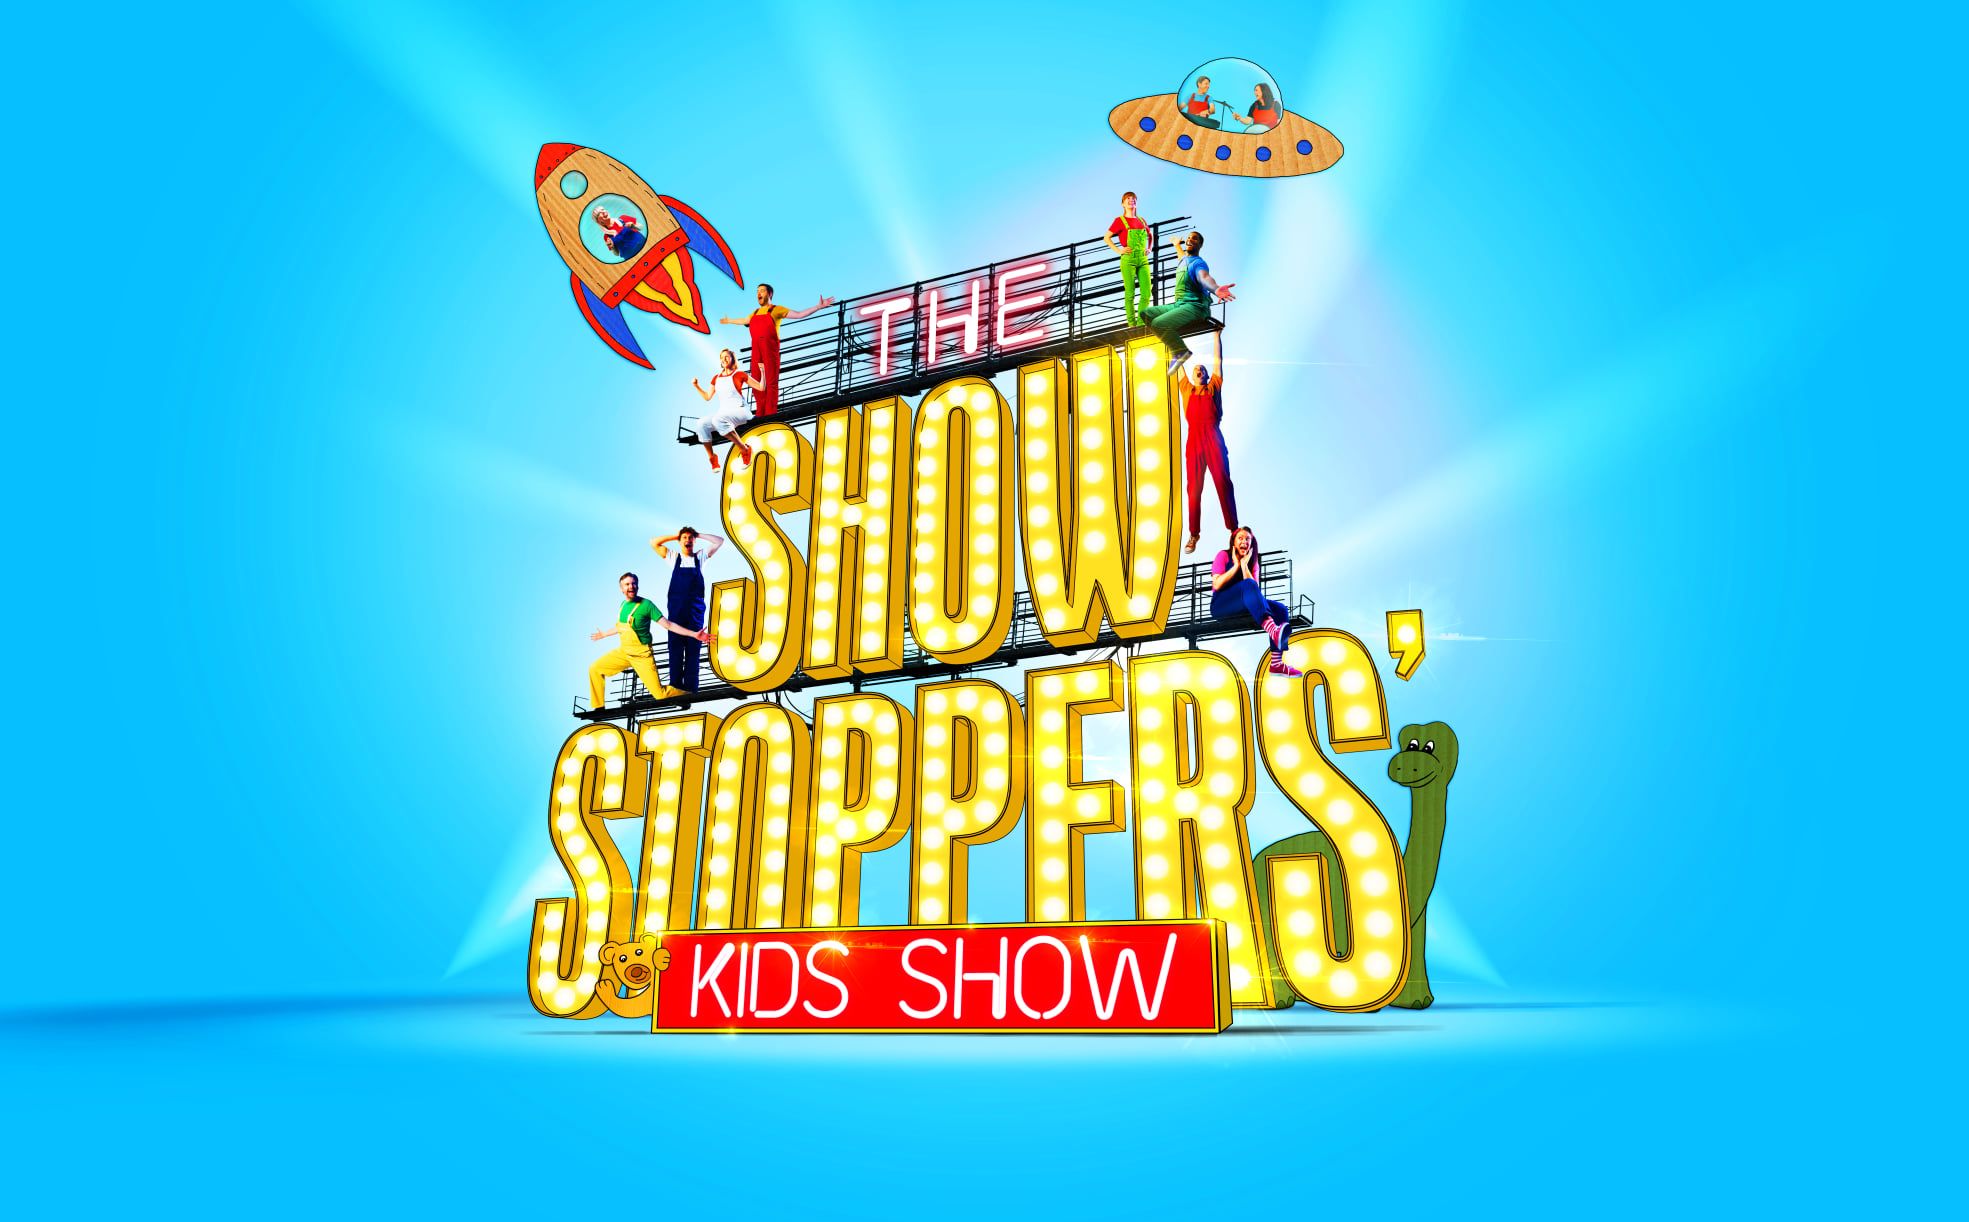 Bring your kids' ideas to life as The Showstoppers bring to you a show brilliant in all ways. Buy The Showstopper Kids Show tickets.